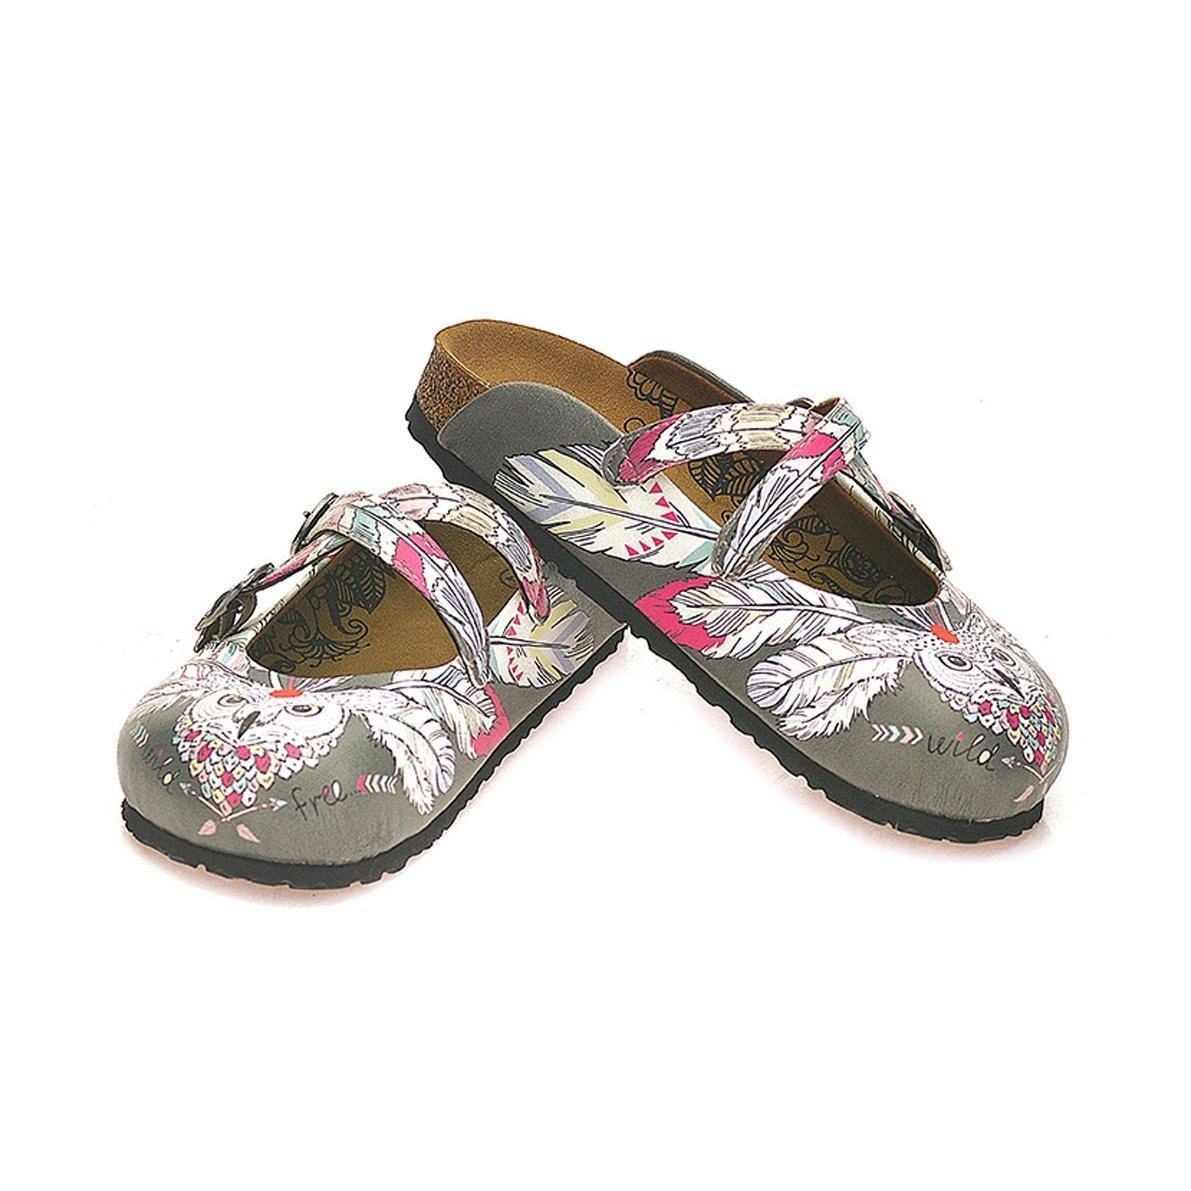 Gray Wild Free Owl Cross-Strap Clogs WCAL133 - Goby CALCEO Clogs 